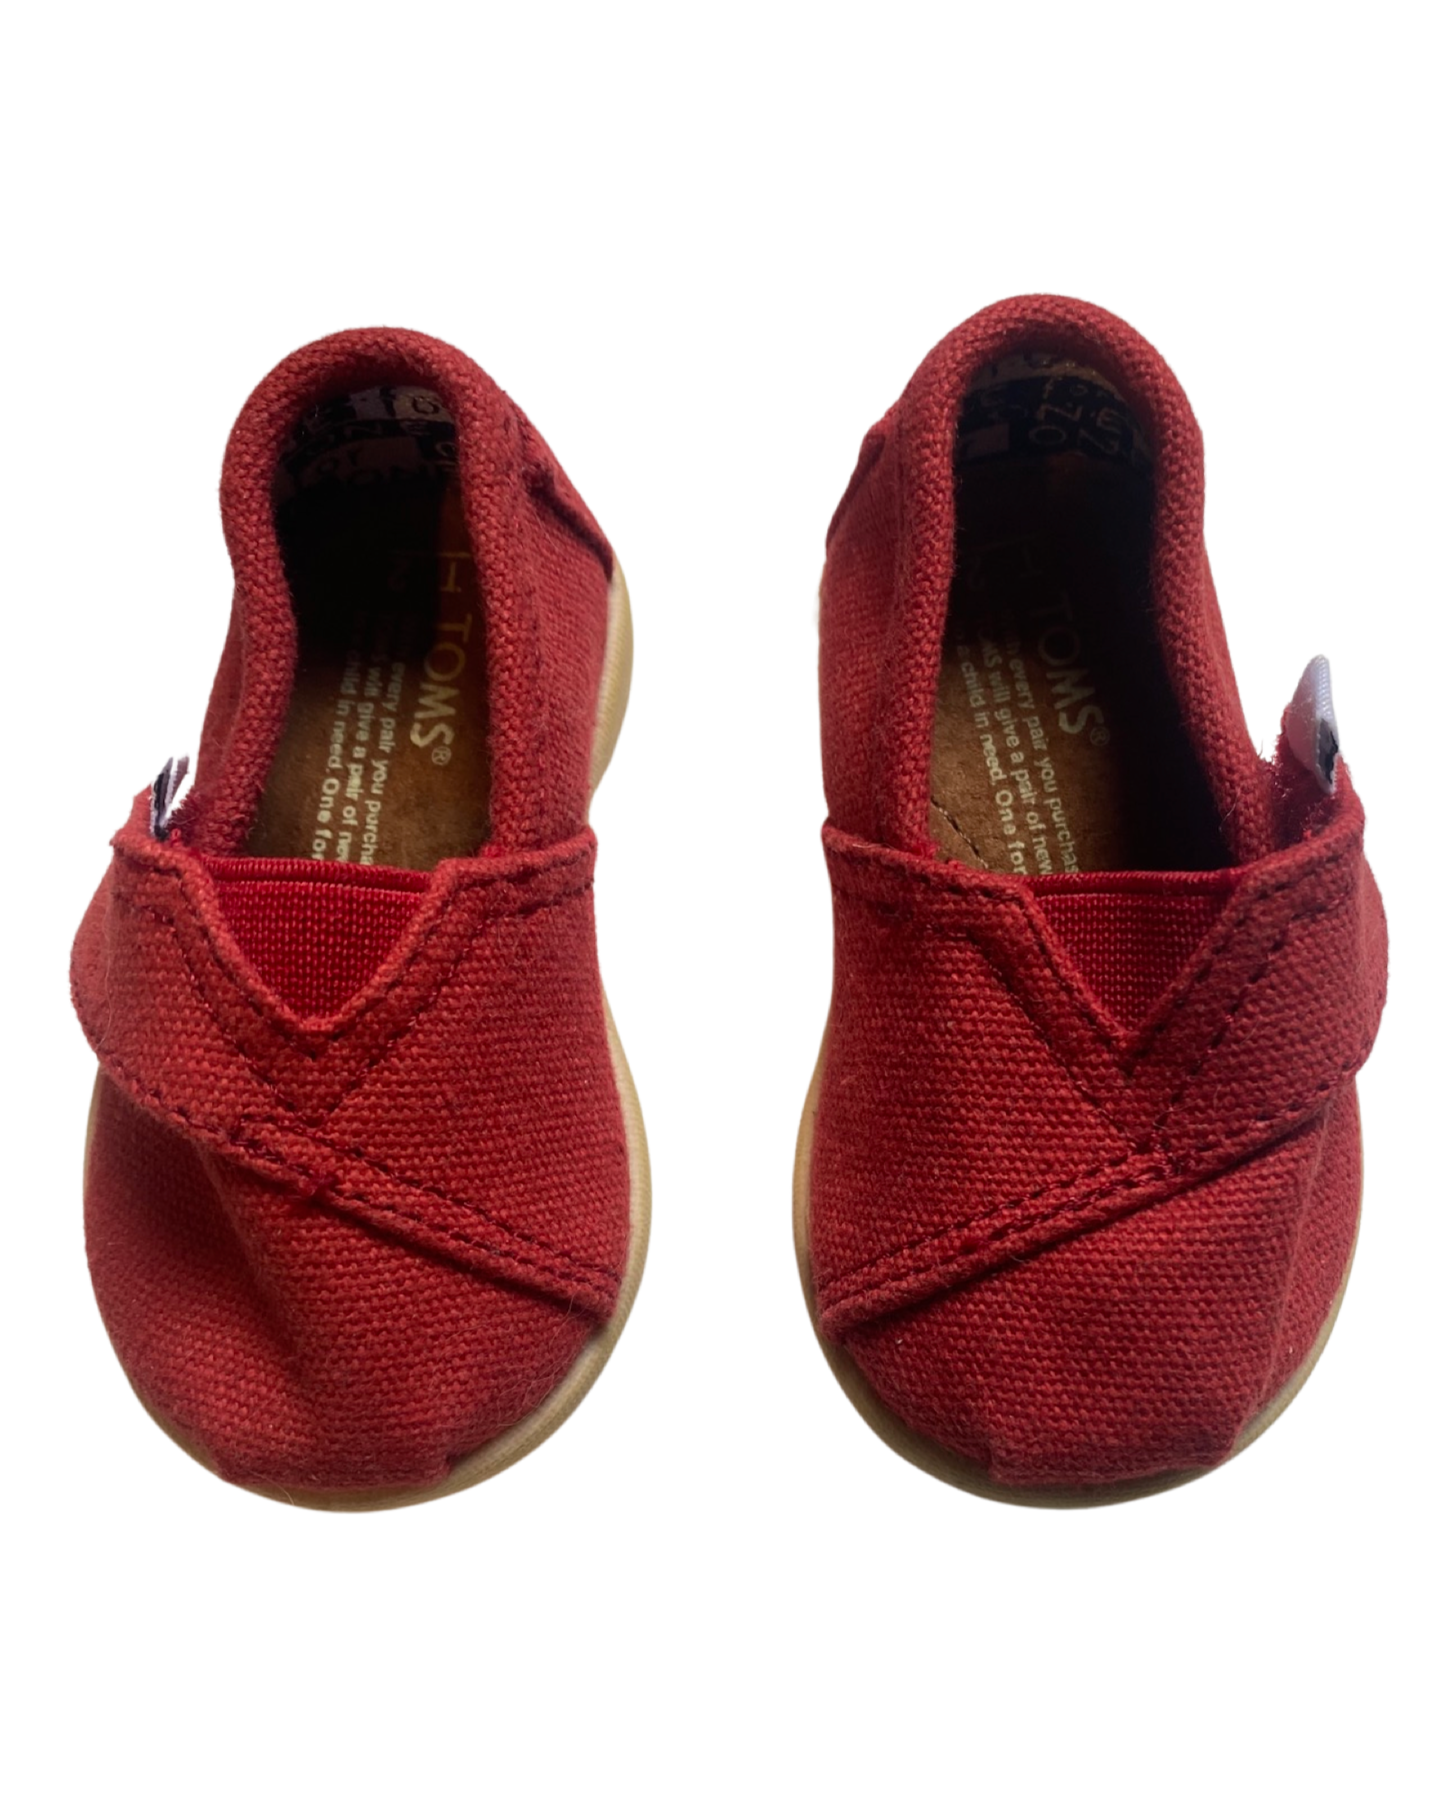 Toms classic tiny alpargata loafers in Red (size T2/UK1.5)